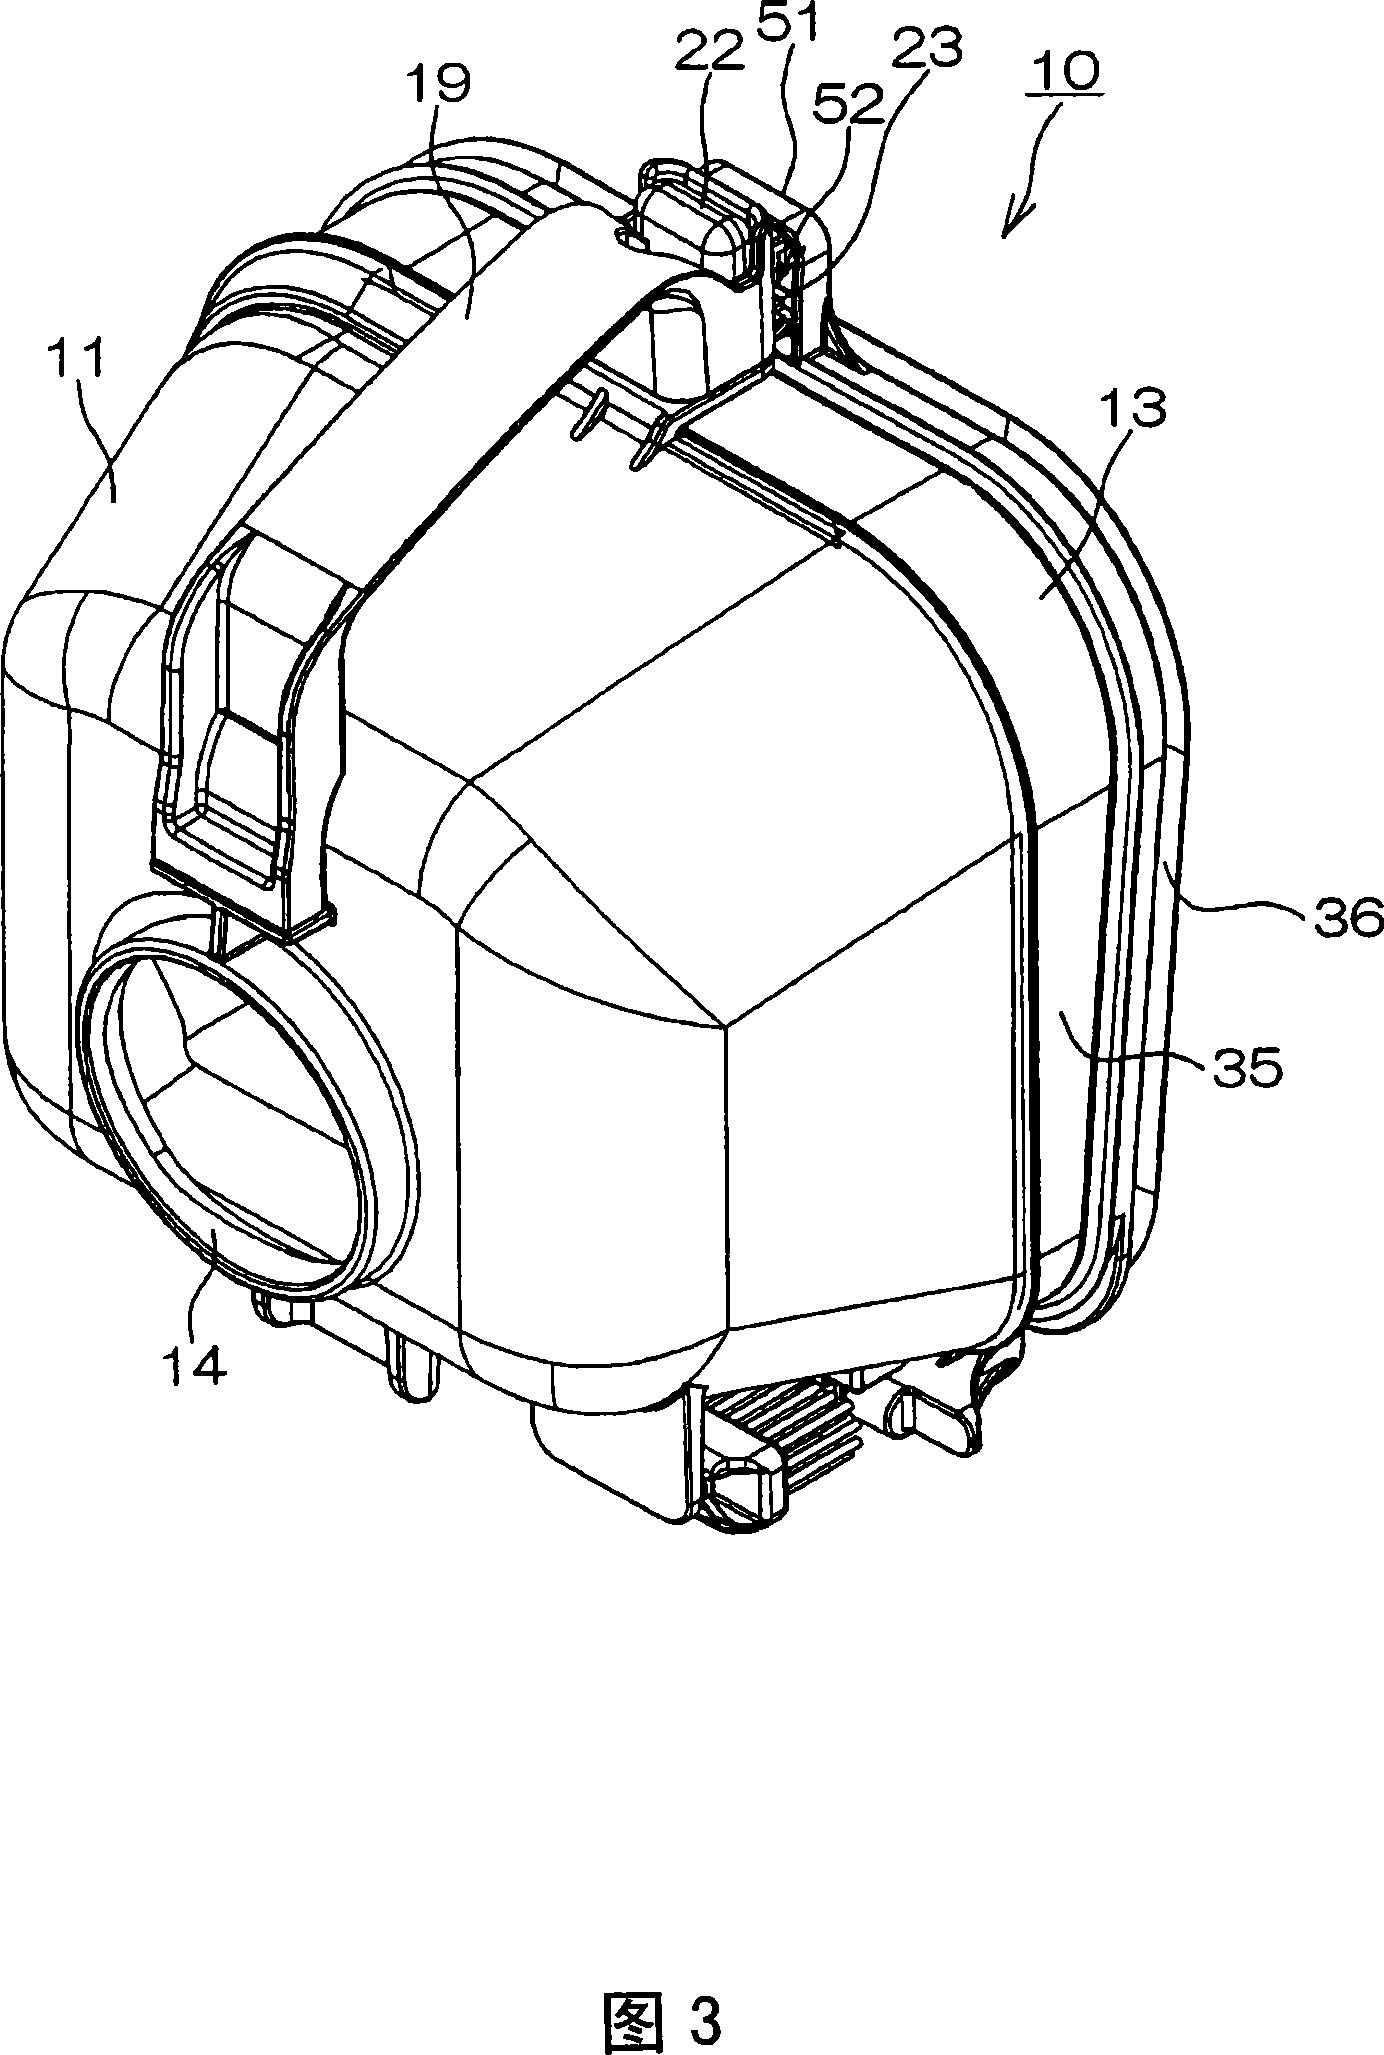 Dust collecting container for electric vacuum cleaner